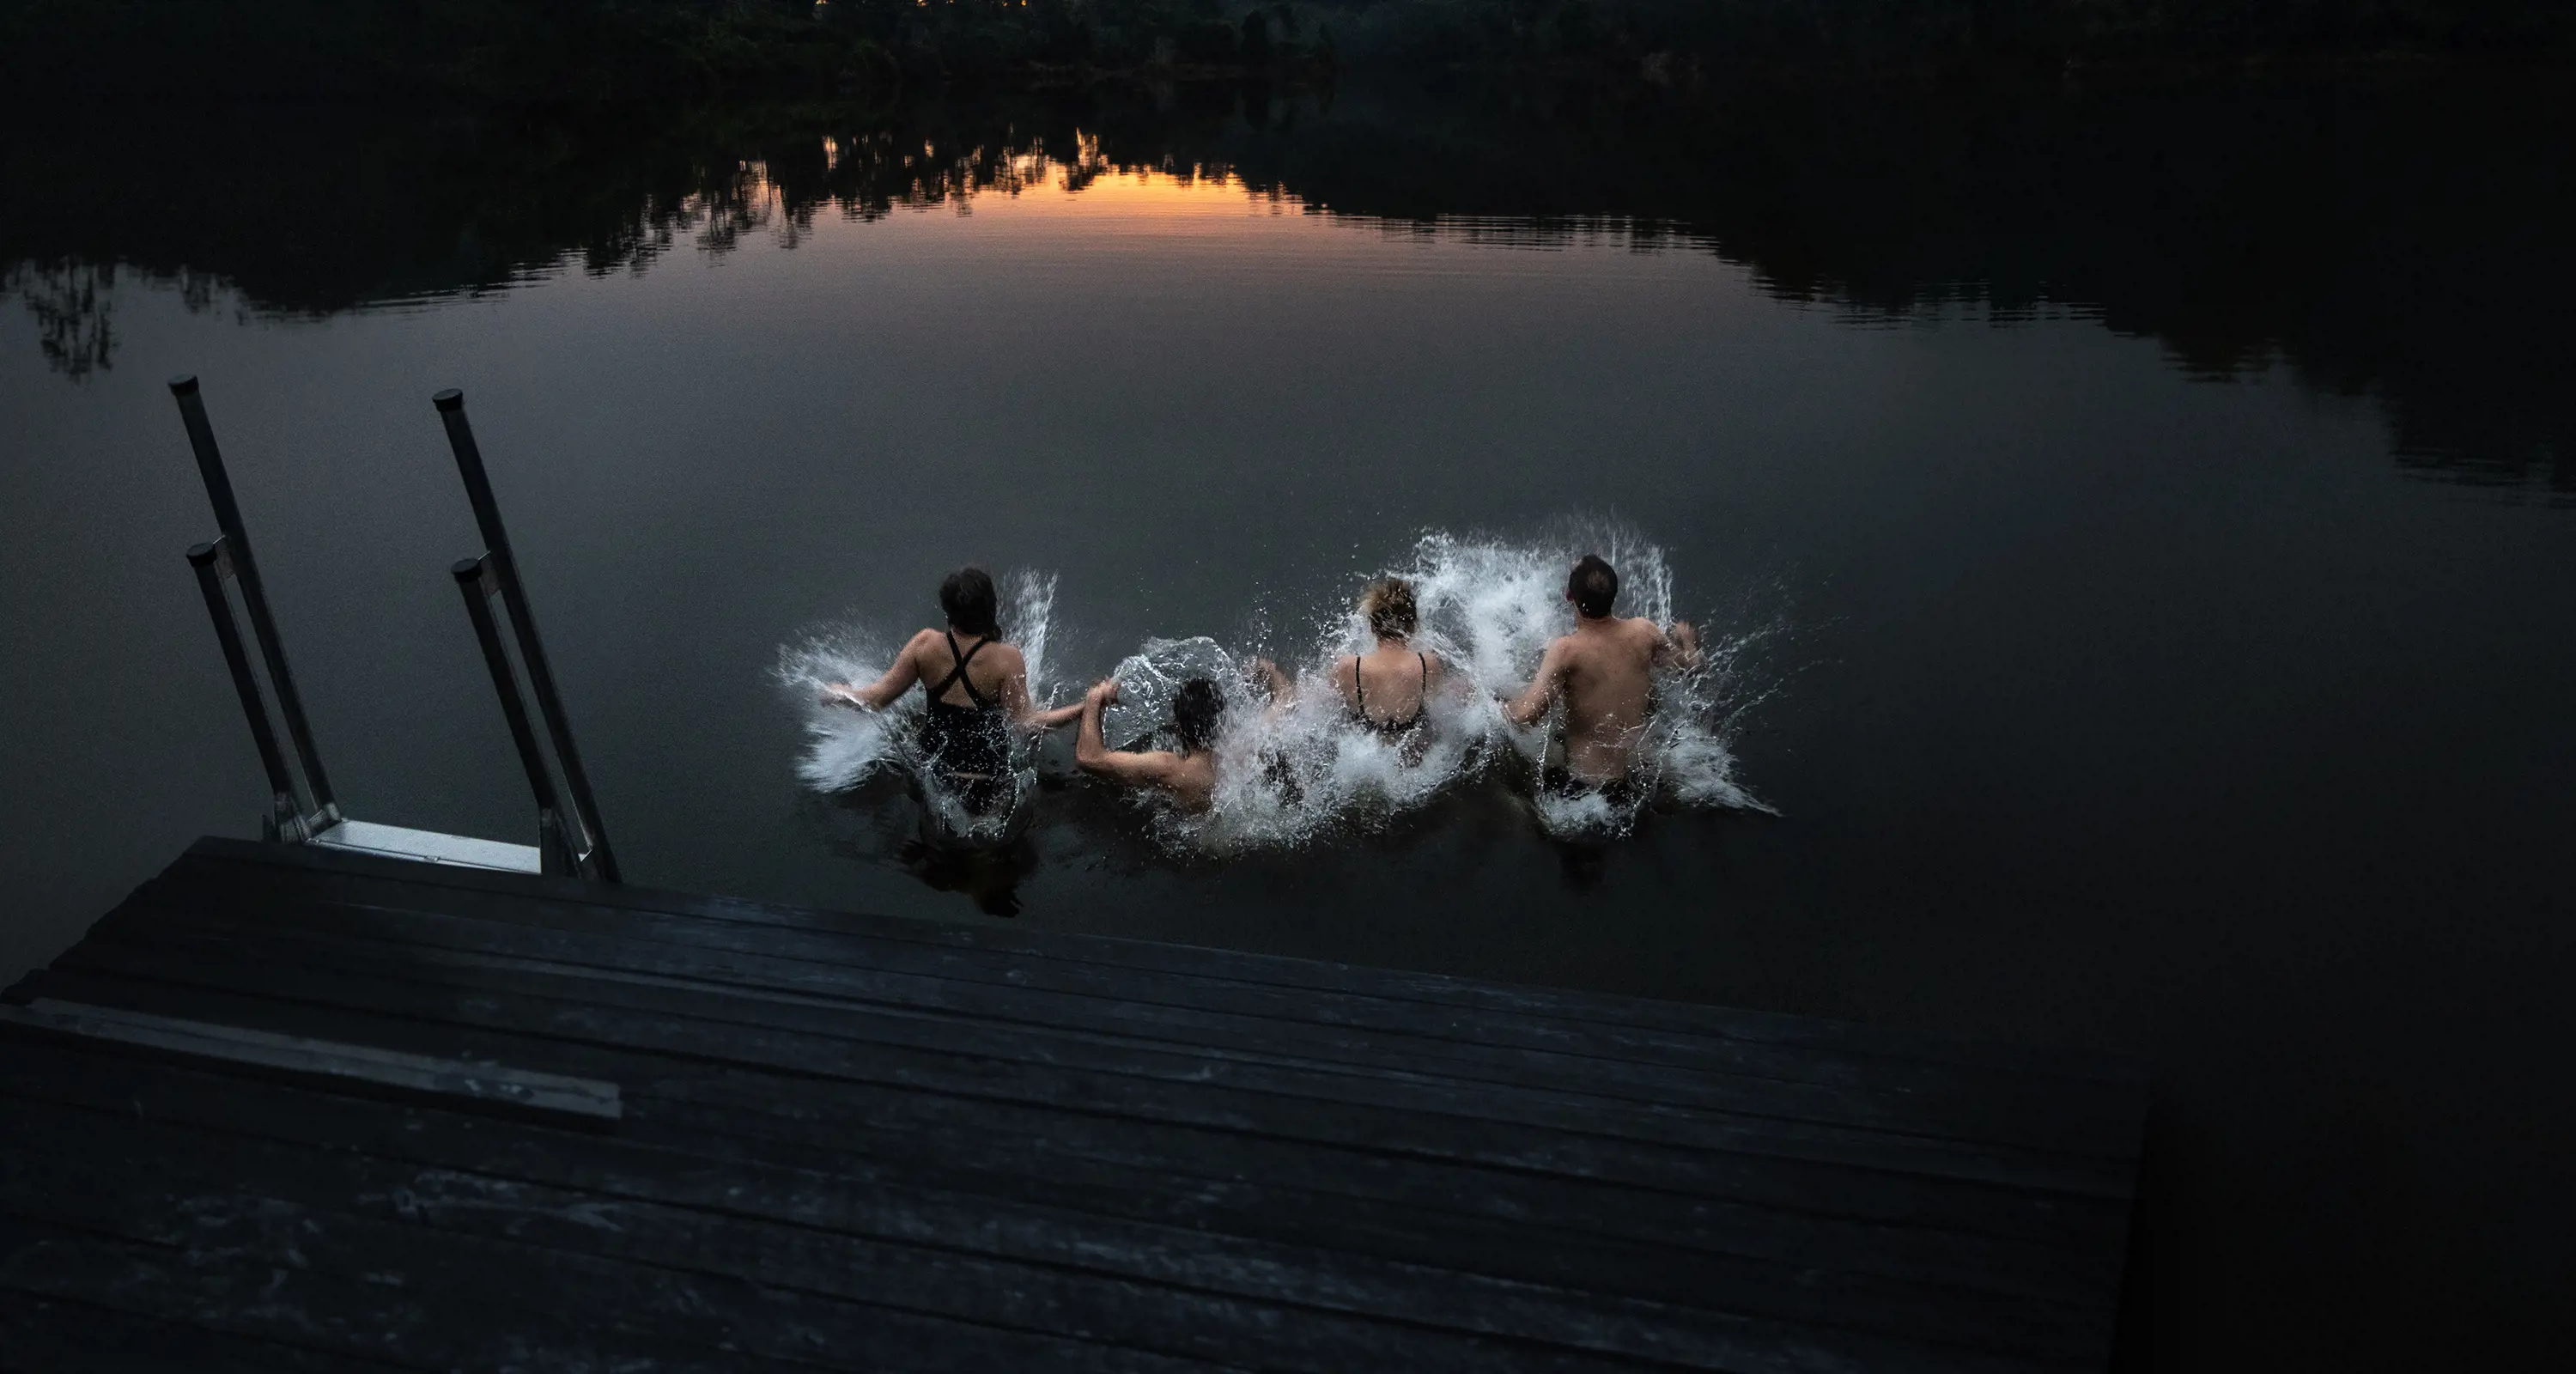 A group of four people jump into the dark waters of a lake at dusk.